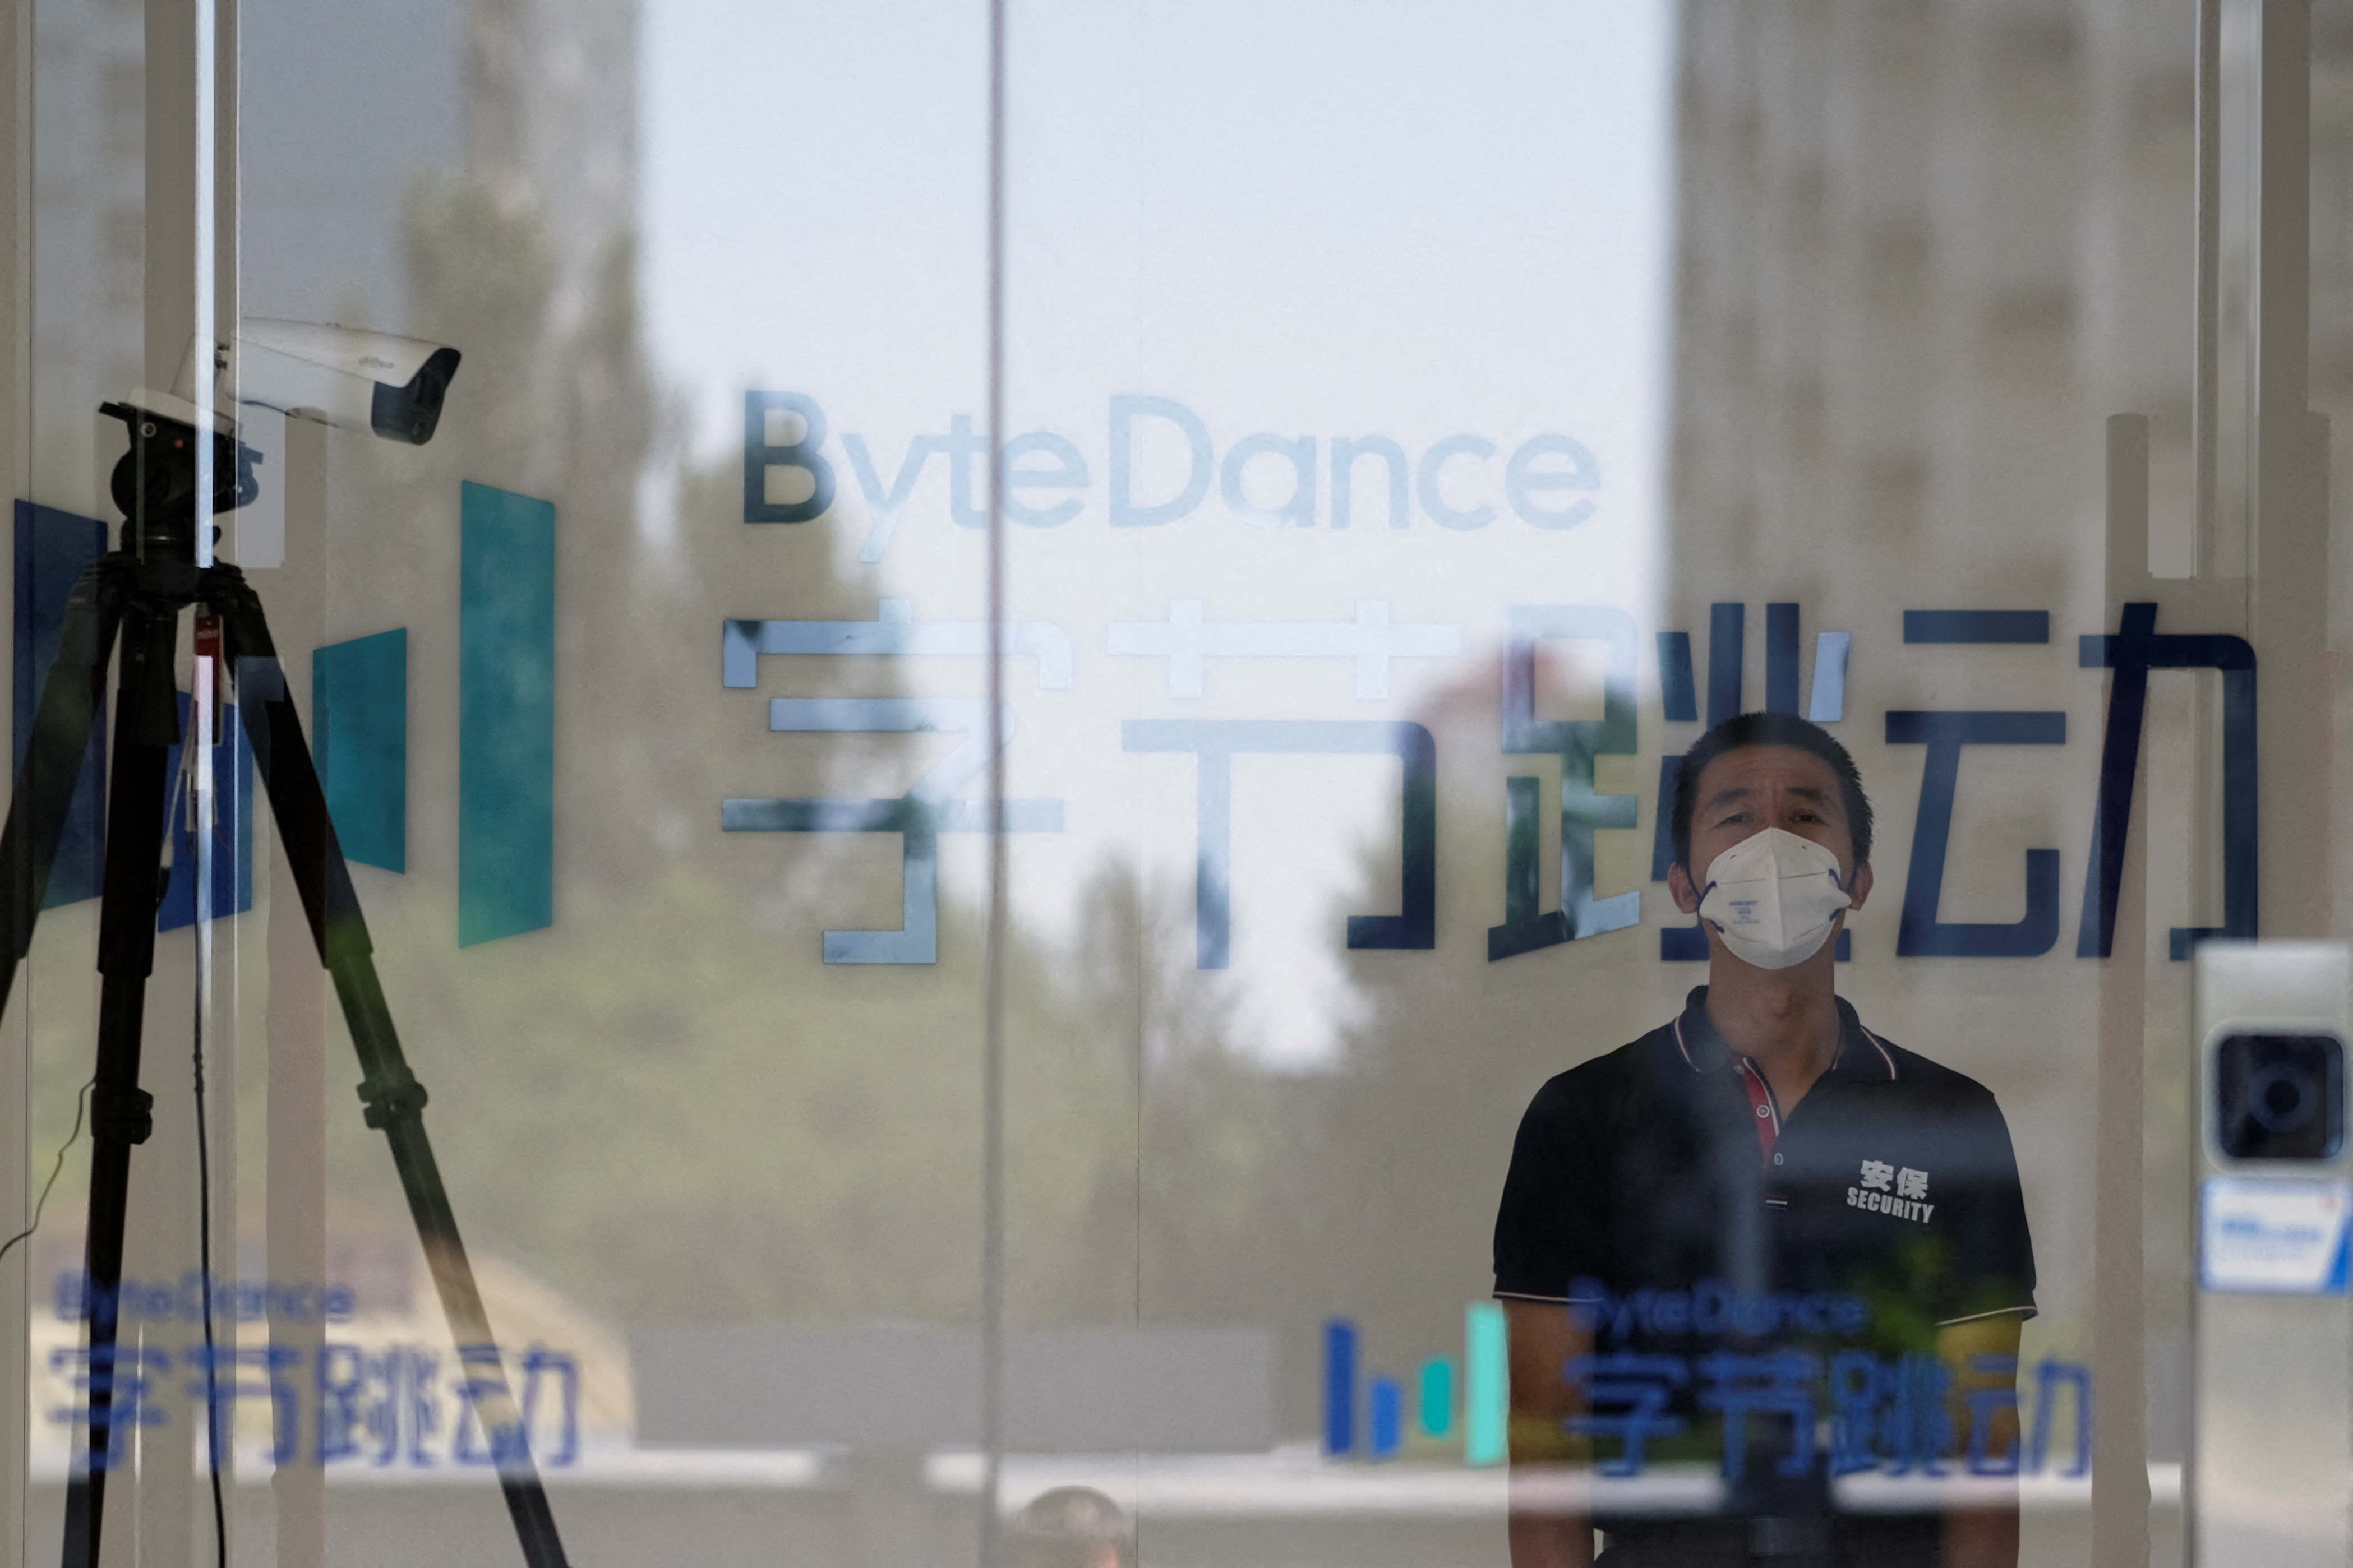 A security guard, wearing a face mask following the coronavirus disease (COVID-19) outbreak, stands near a surveillance camera at an office of Bytedance. Beijing, China July 7, 2020.  REUTERS/Thomas Suen/File Photo